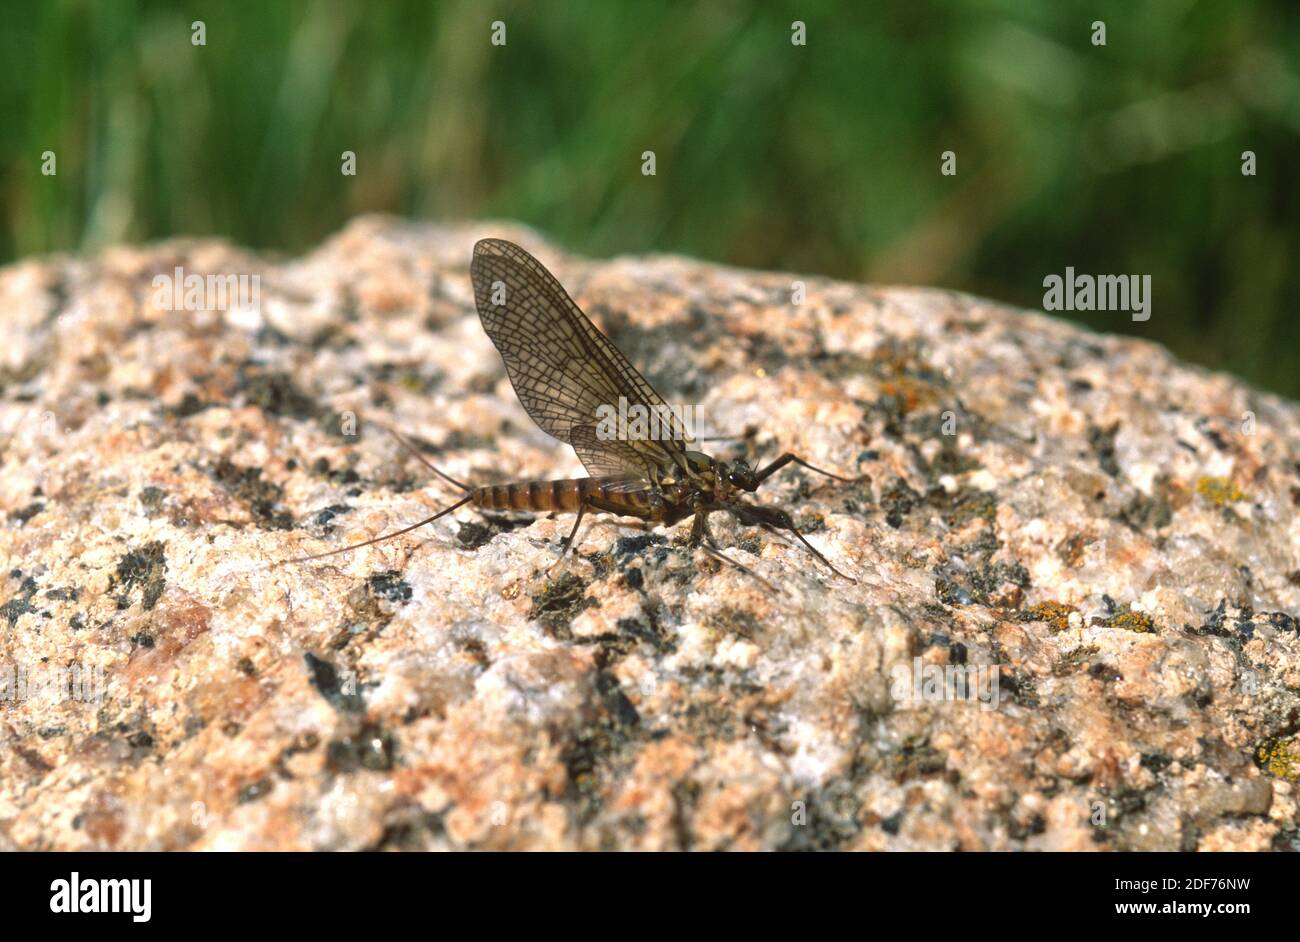 March brown mayfly (Rhithrogena germanica) is an insect used for fly fishing. This photo was taken near Setcases, Girona province, Catalonia, Spain. Stock Photo